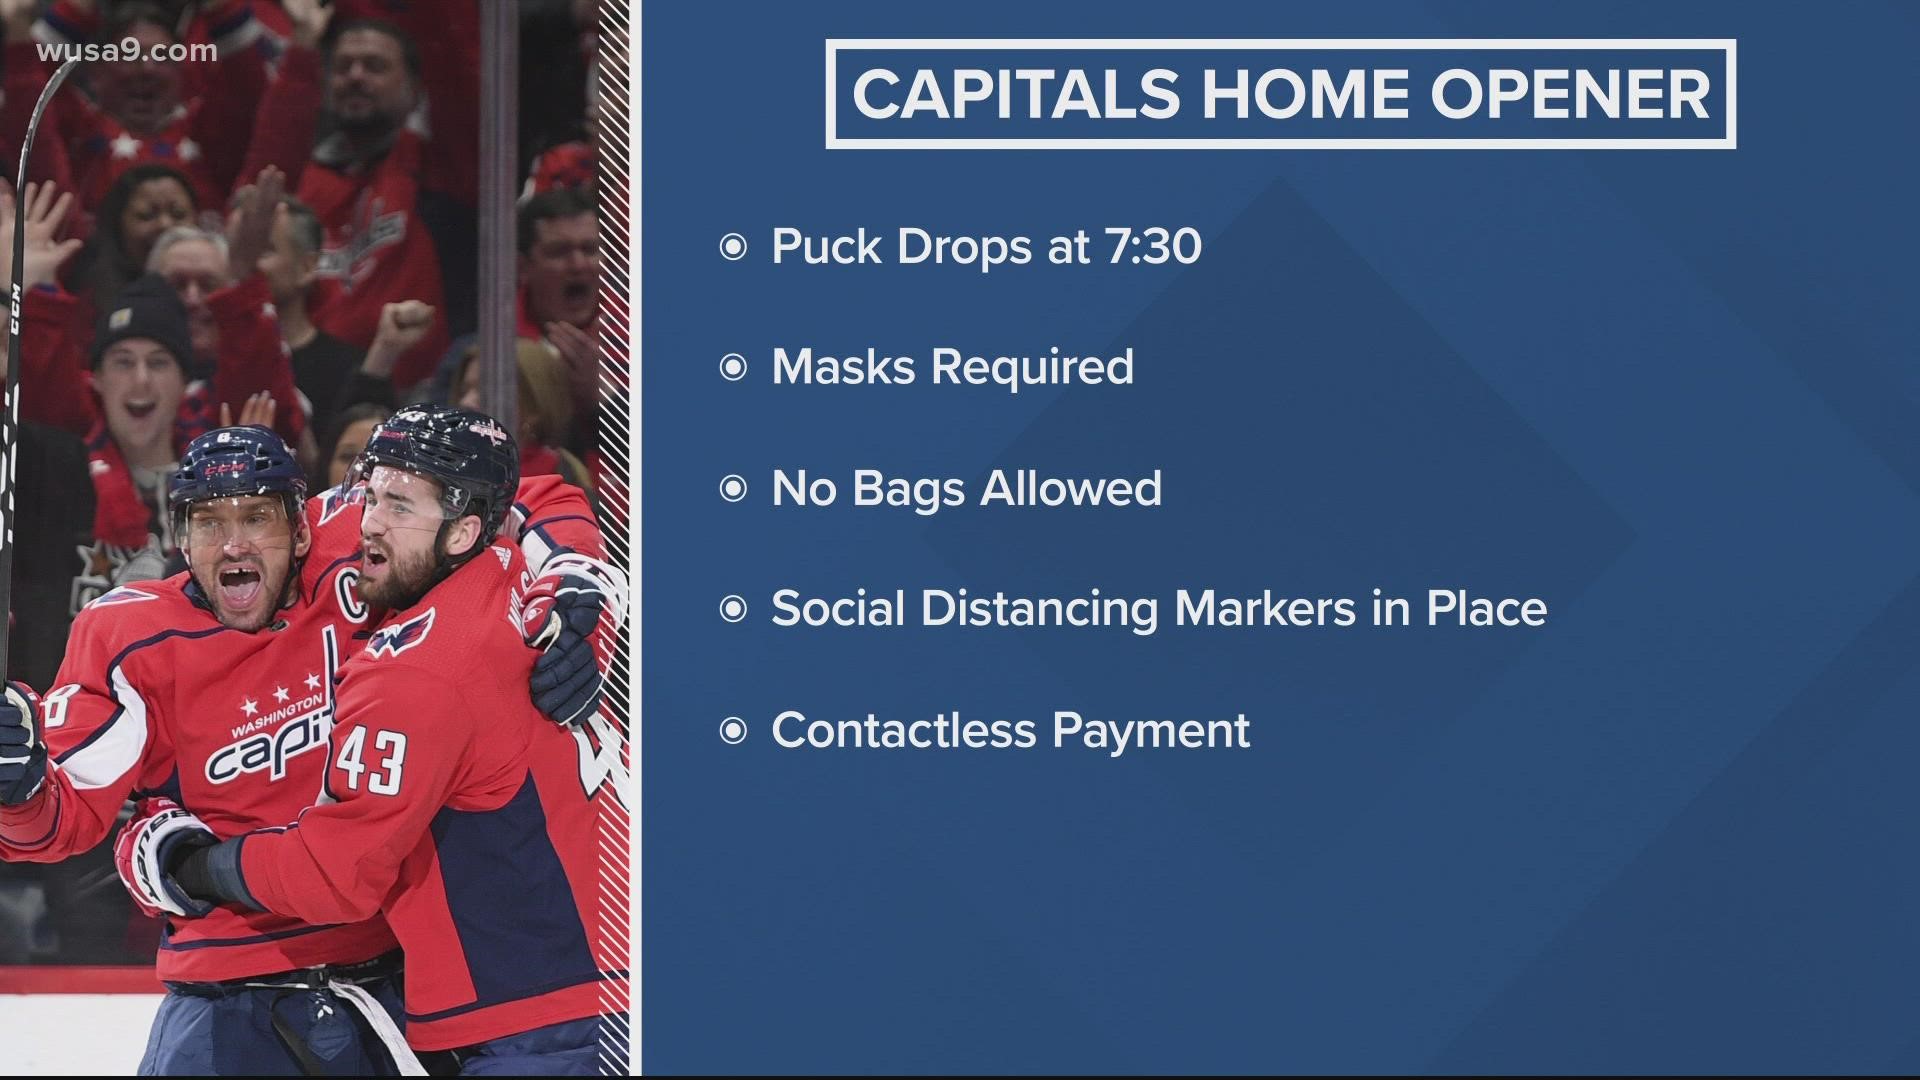 Here's what fans can expect at Capital One Arena.